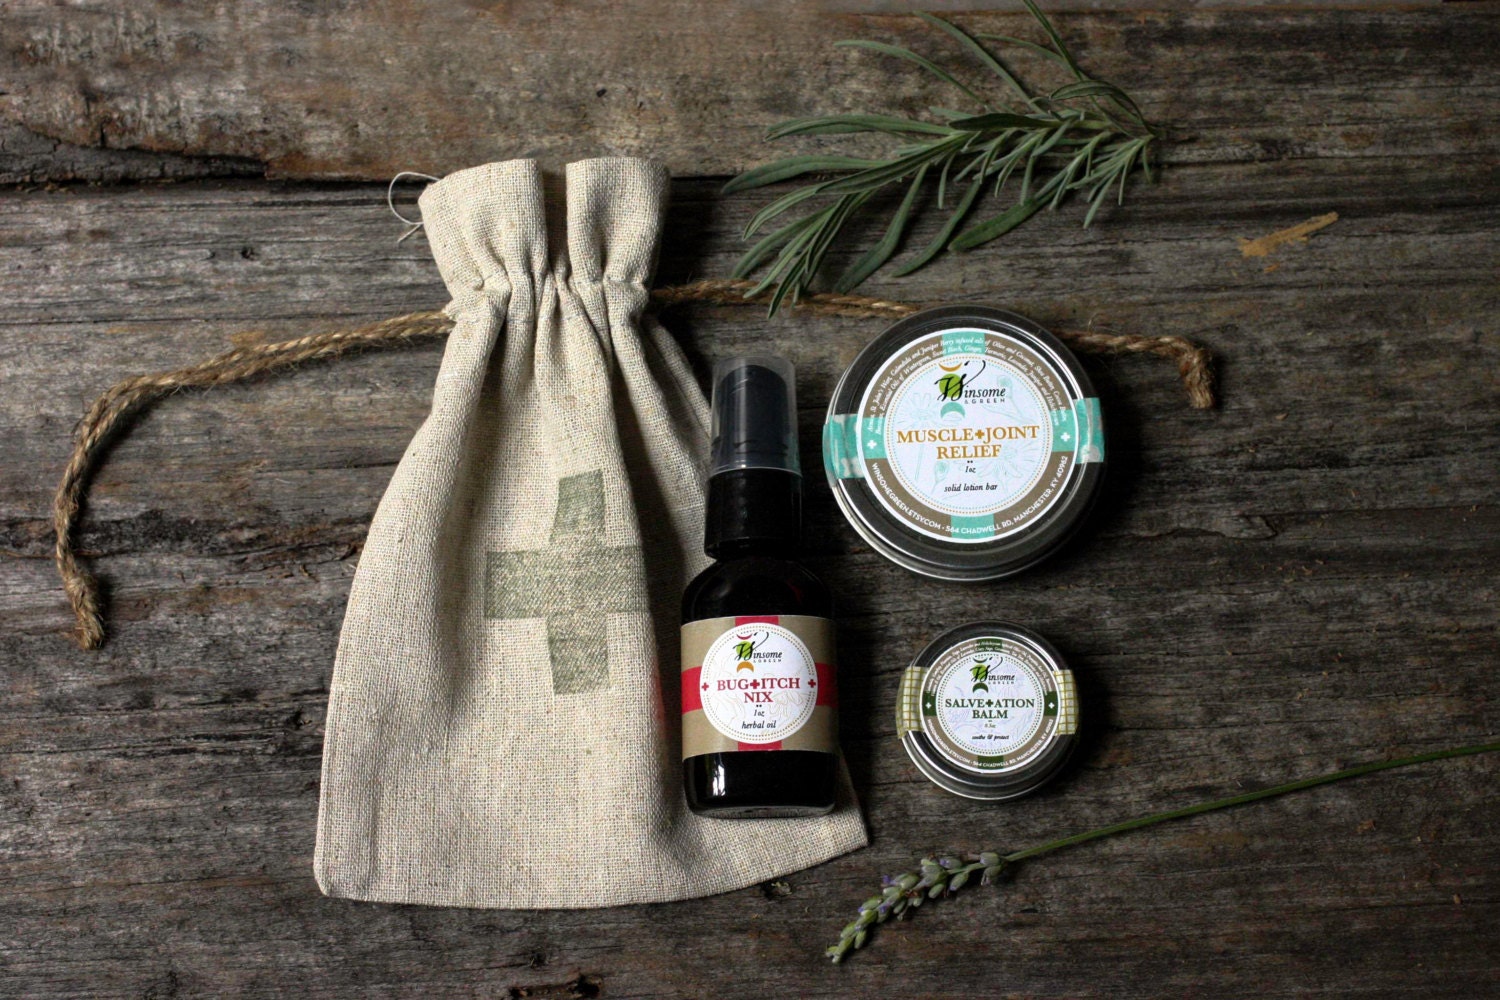 Outdoors Survival Kit / GIft for Him / Hunger Games / Under 25 / cyber monday / theteam, cabin, camping, rustic, swiss cross, skincare - WinsomeGreen